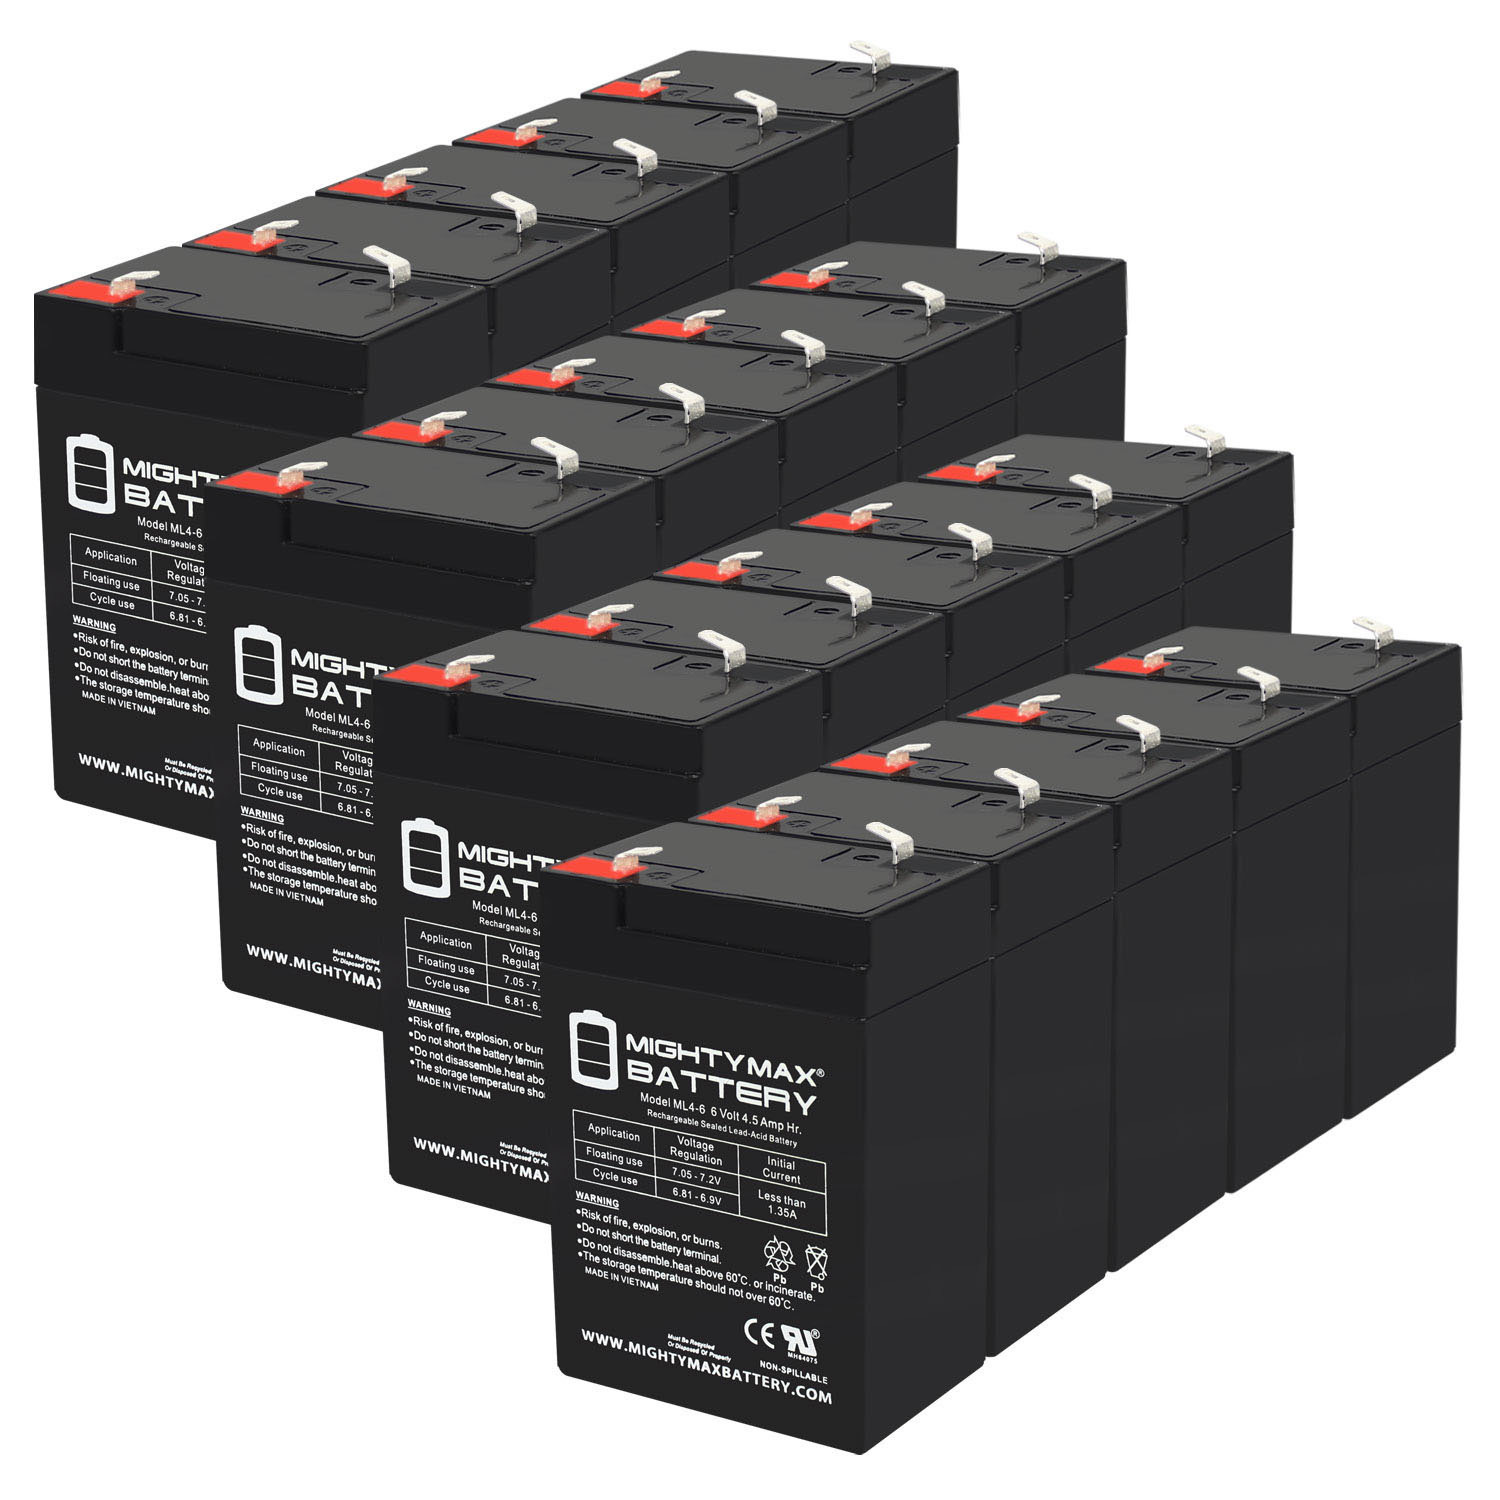 6V 4.5AH SLA Replacement Battery for Dual-Lite ML2CH Lighting - 20 Pack